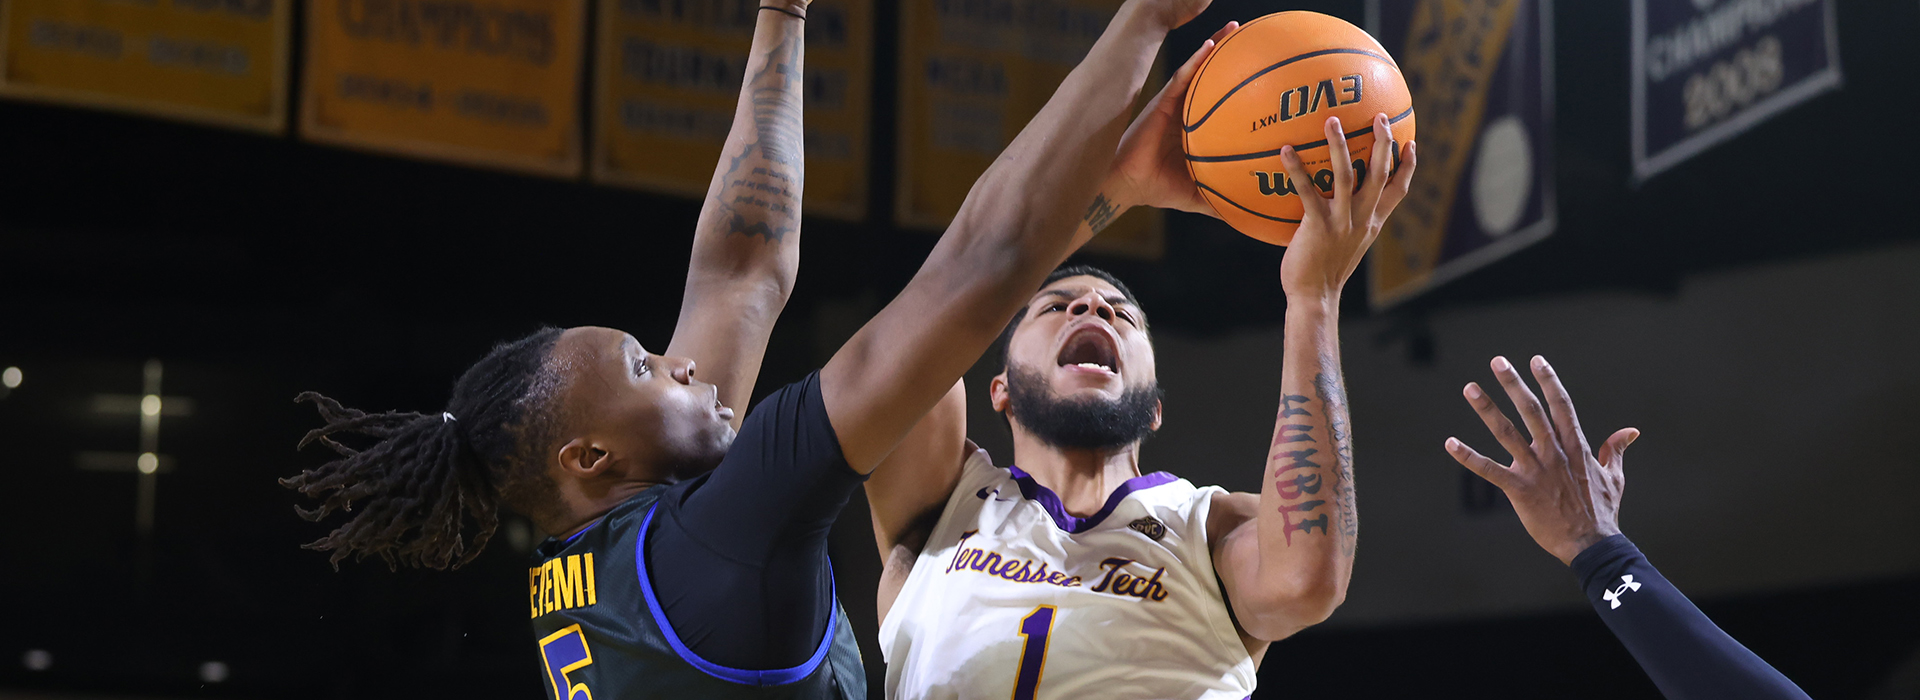 Late push falls short in Tech loss to OVC-leading Morehead State